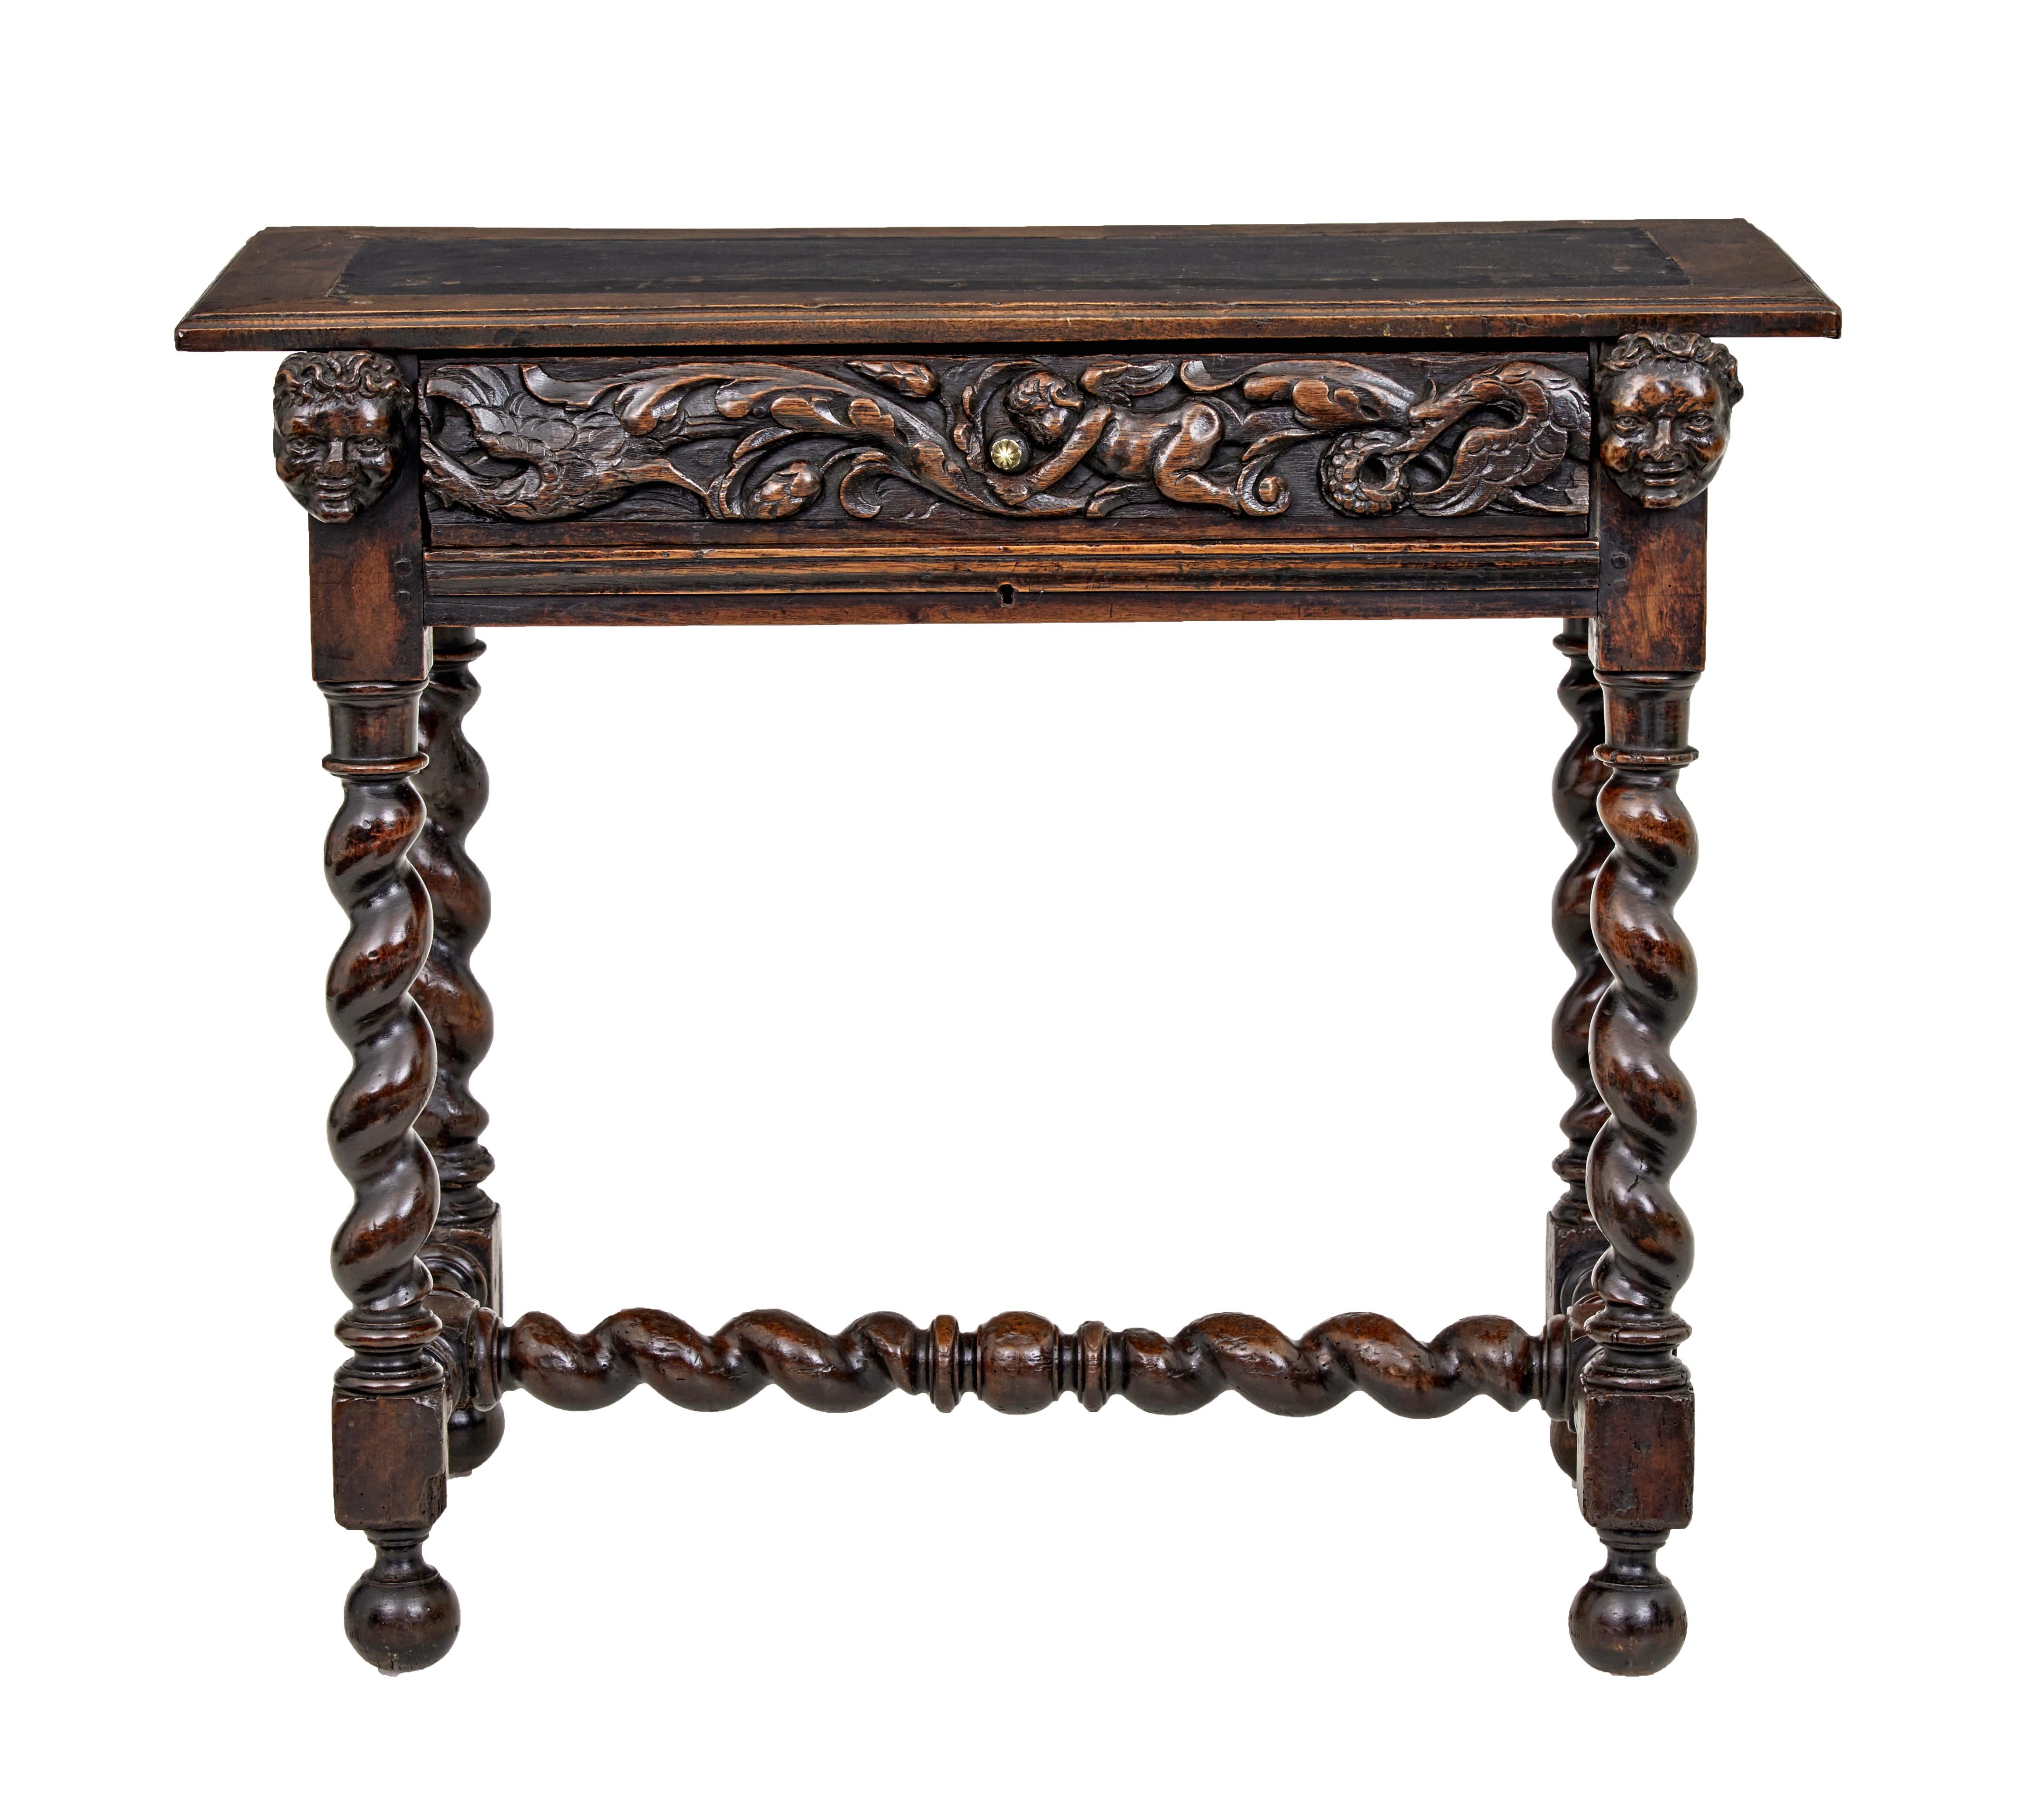 Early 19th century Flemish carved walnut side table circa 1820.

Character walnut single drawer side table.  Top with inset leather panel and walnut border.  Below a profusely carved drawer with later brass handle, flanked either side by